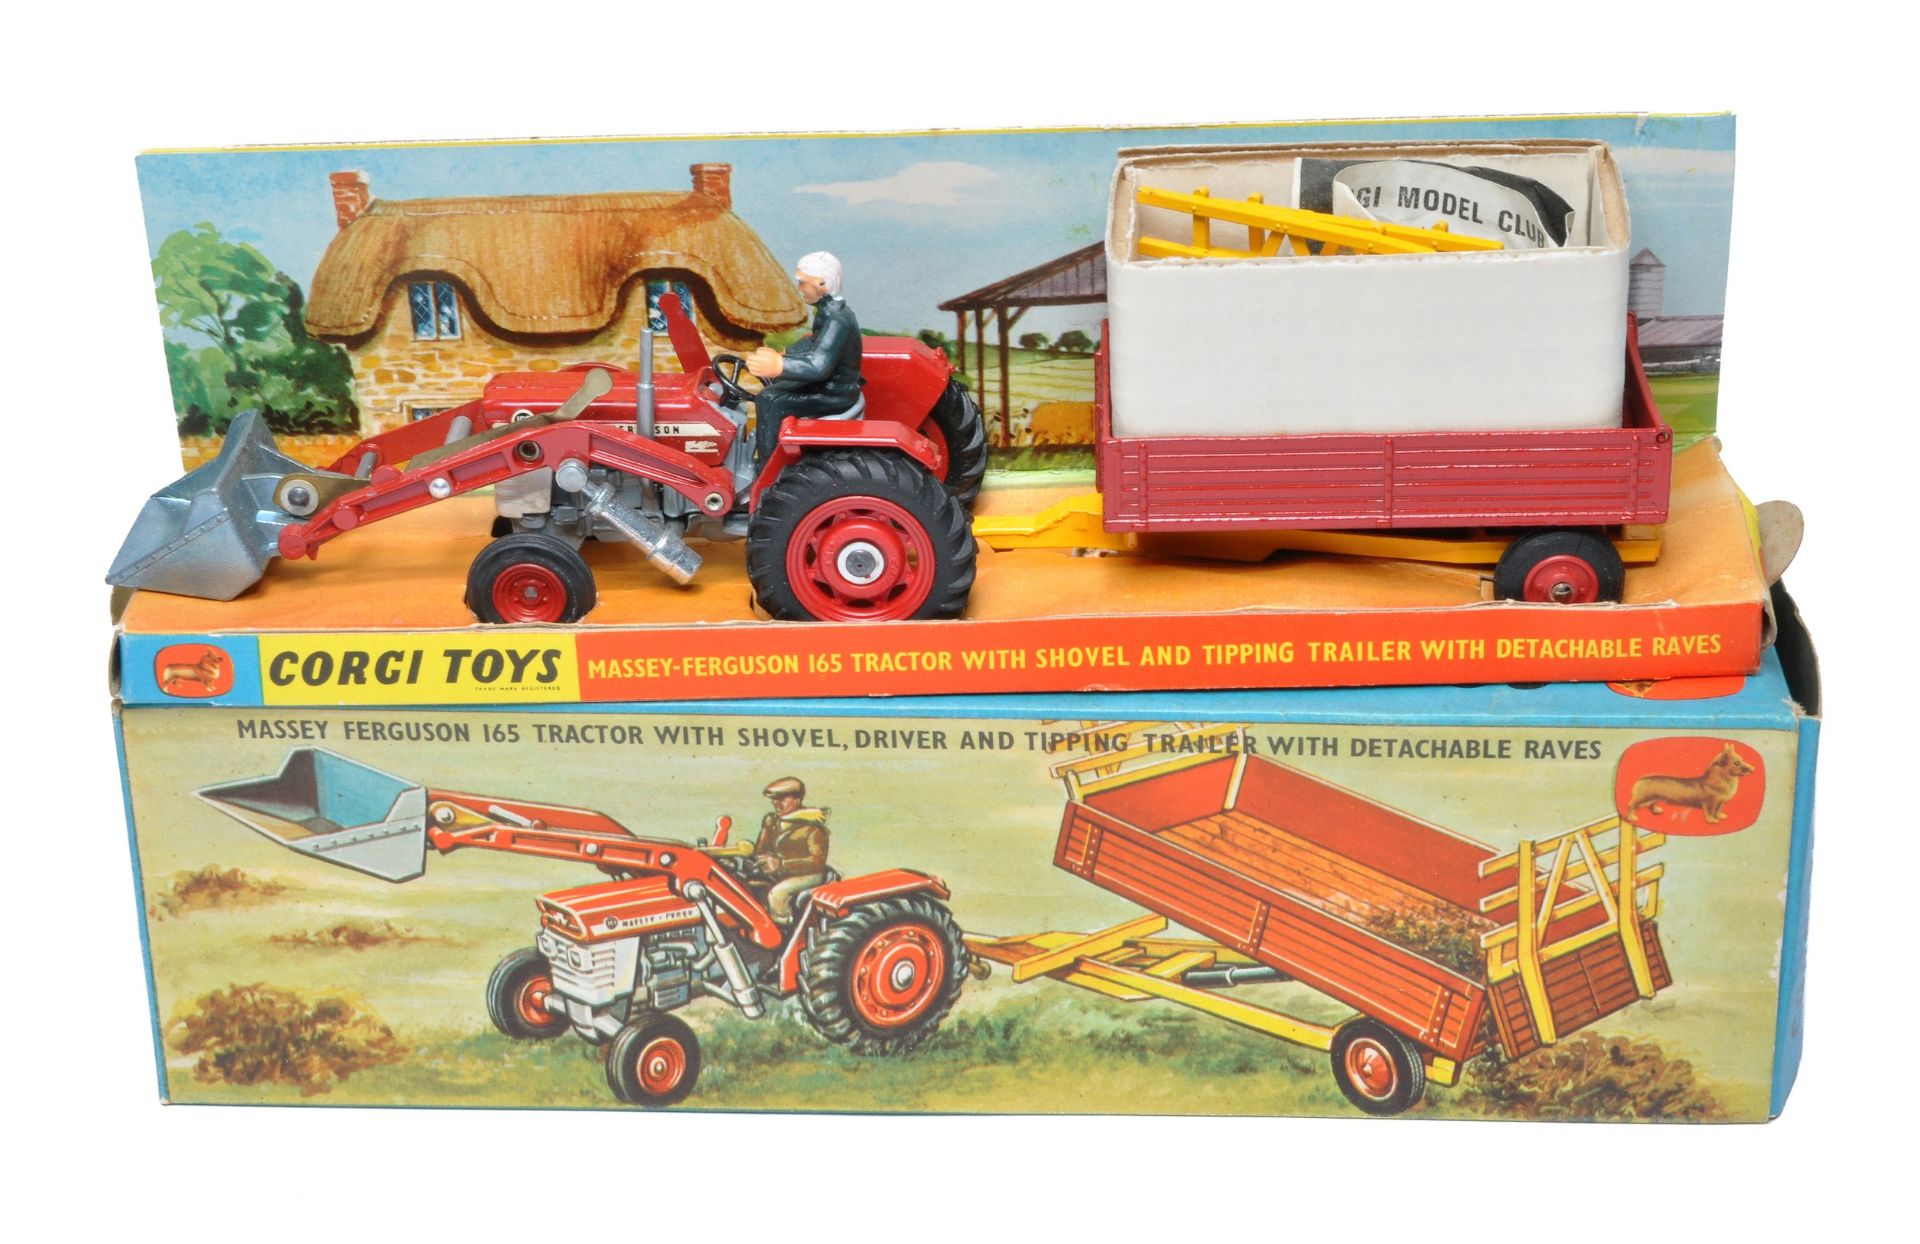 Corgi Gift Set No. 9 Massey Ferguson 165 Tractor and Trailer. Displays excellent with very little